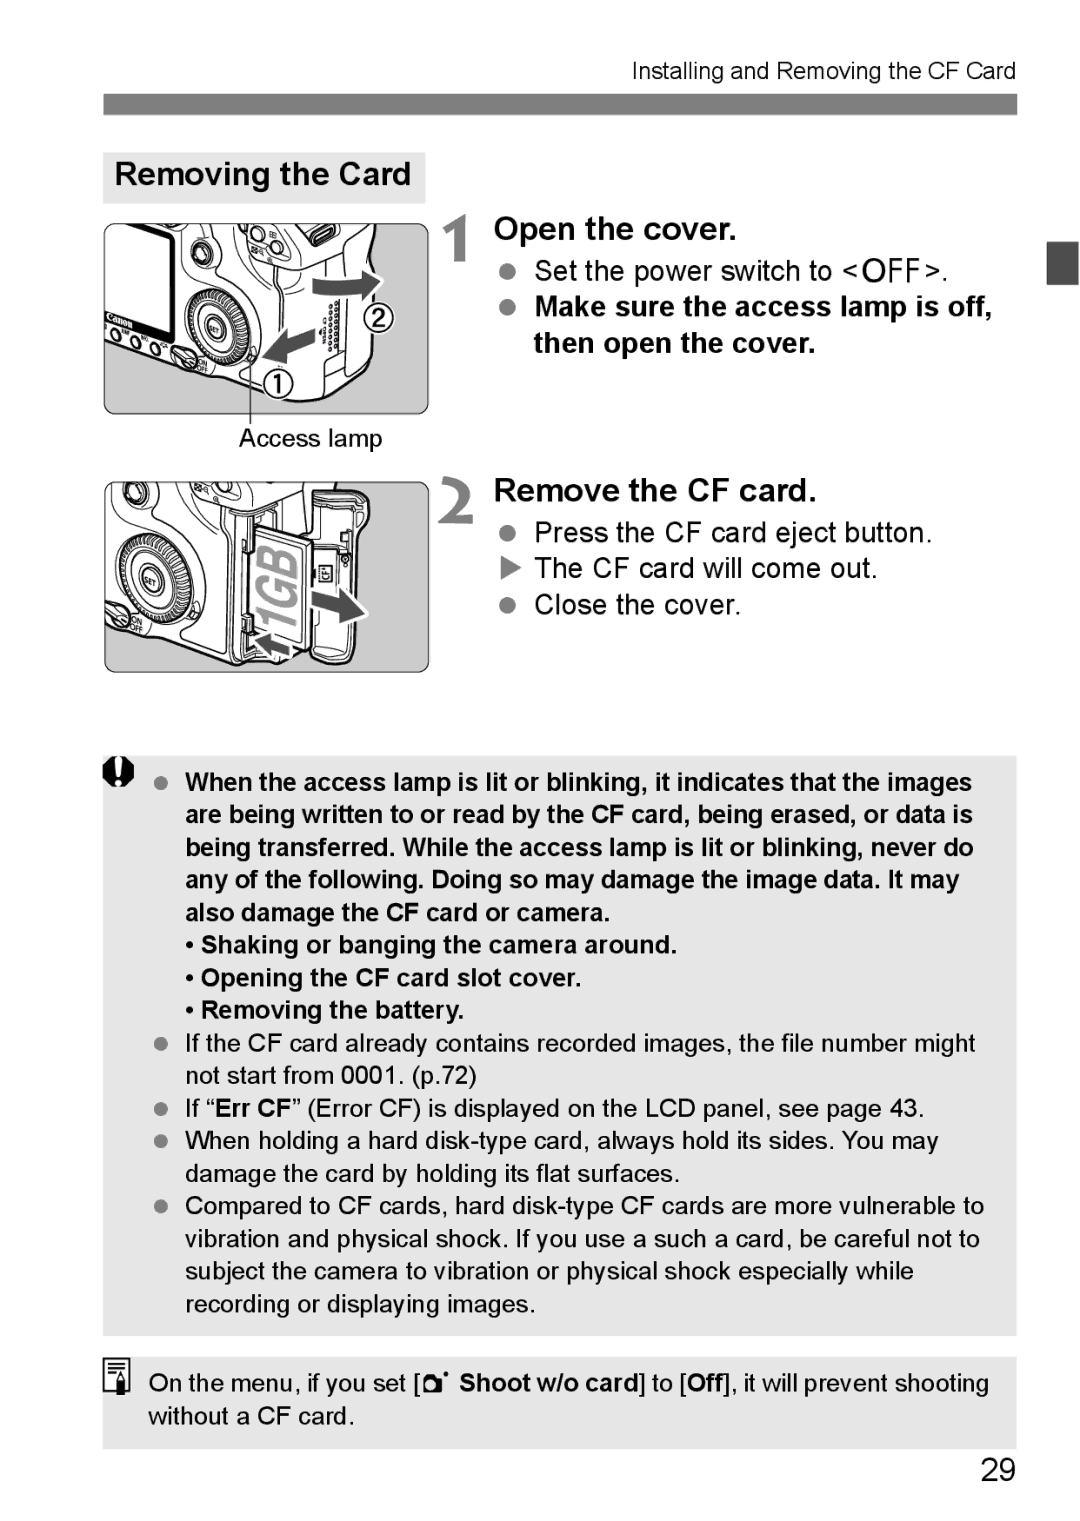 Canon EOS40D instruction manual Removing the Card Open the cover, Remove the CF card, Set the power switch to 